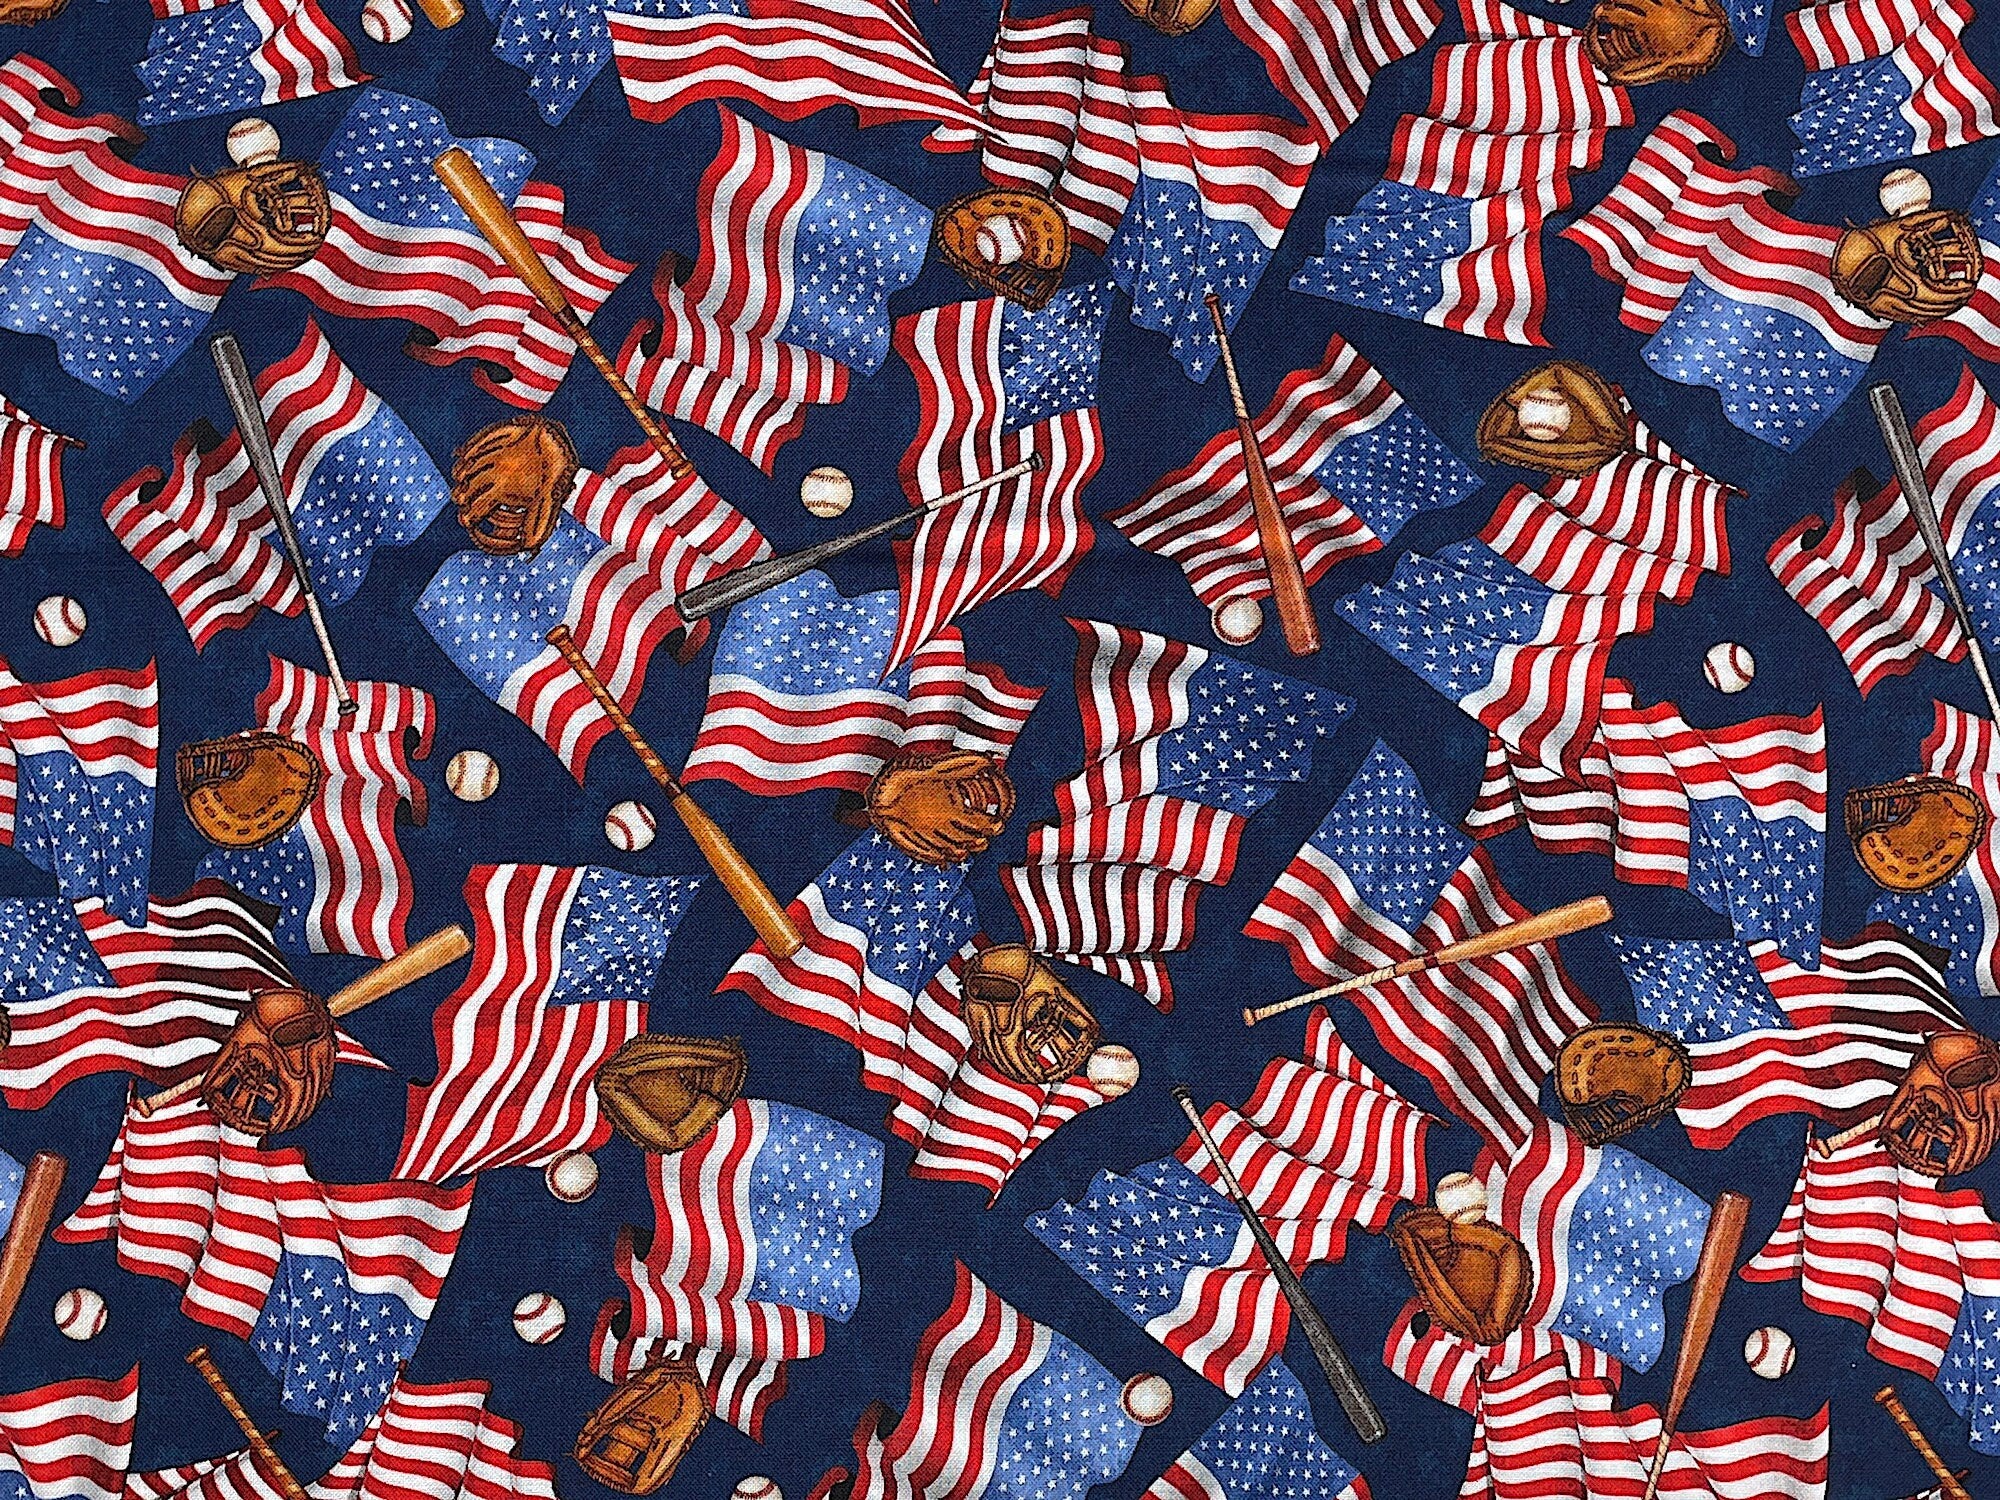 Cotton fabric covered with USA flags, baseball bats, balls and gloves.